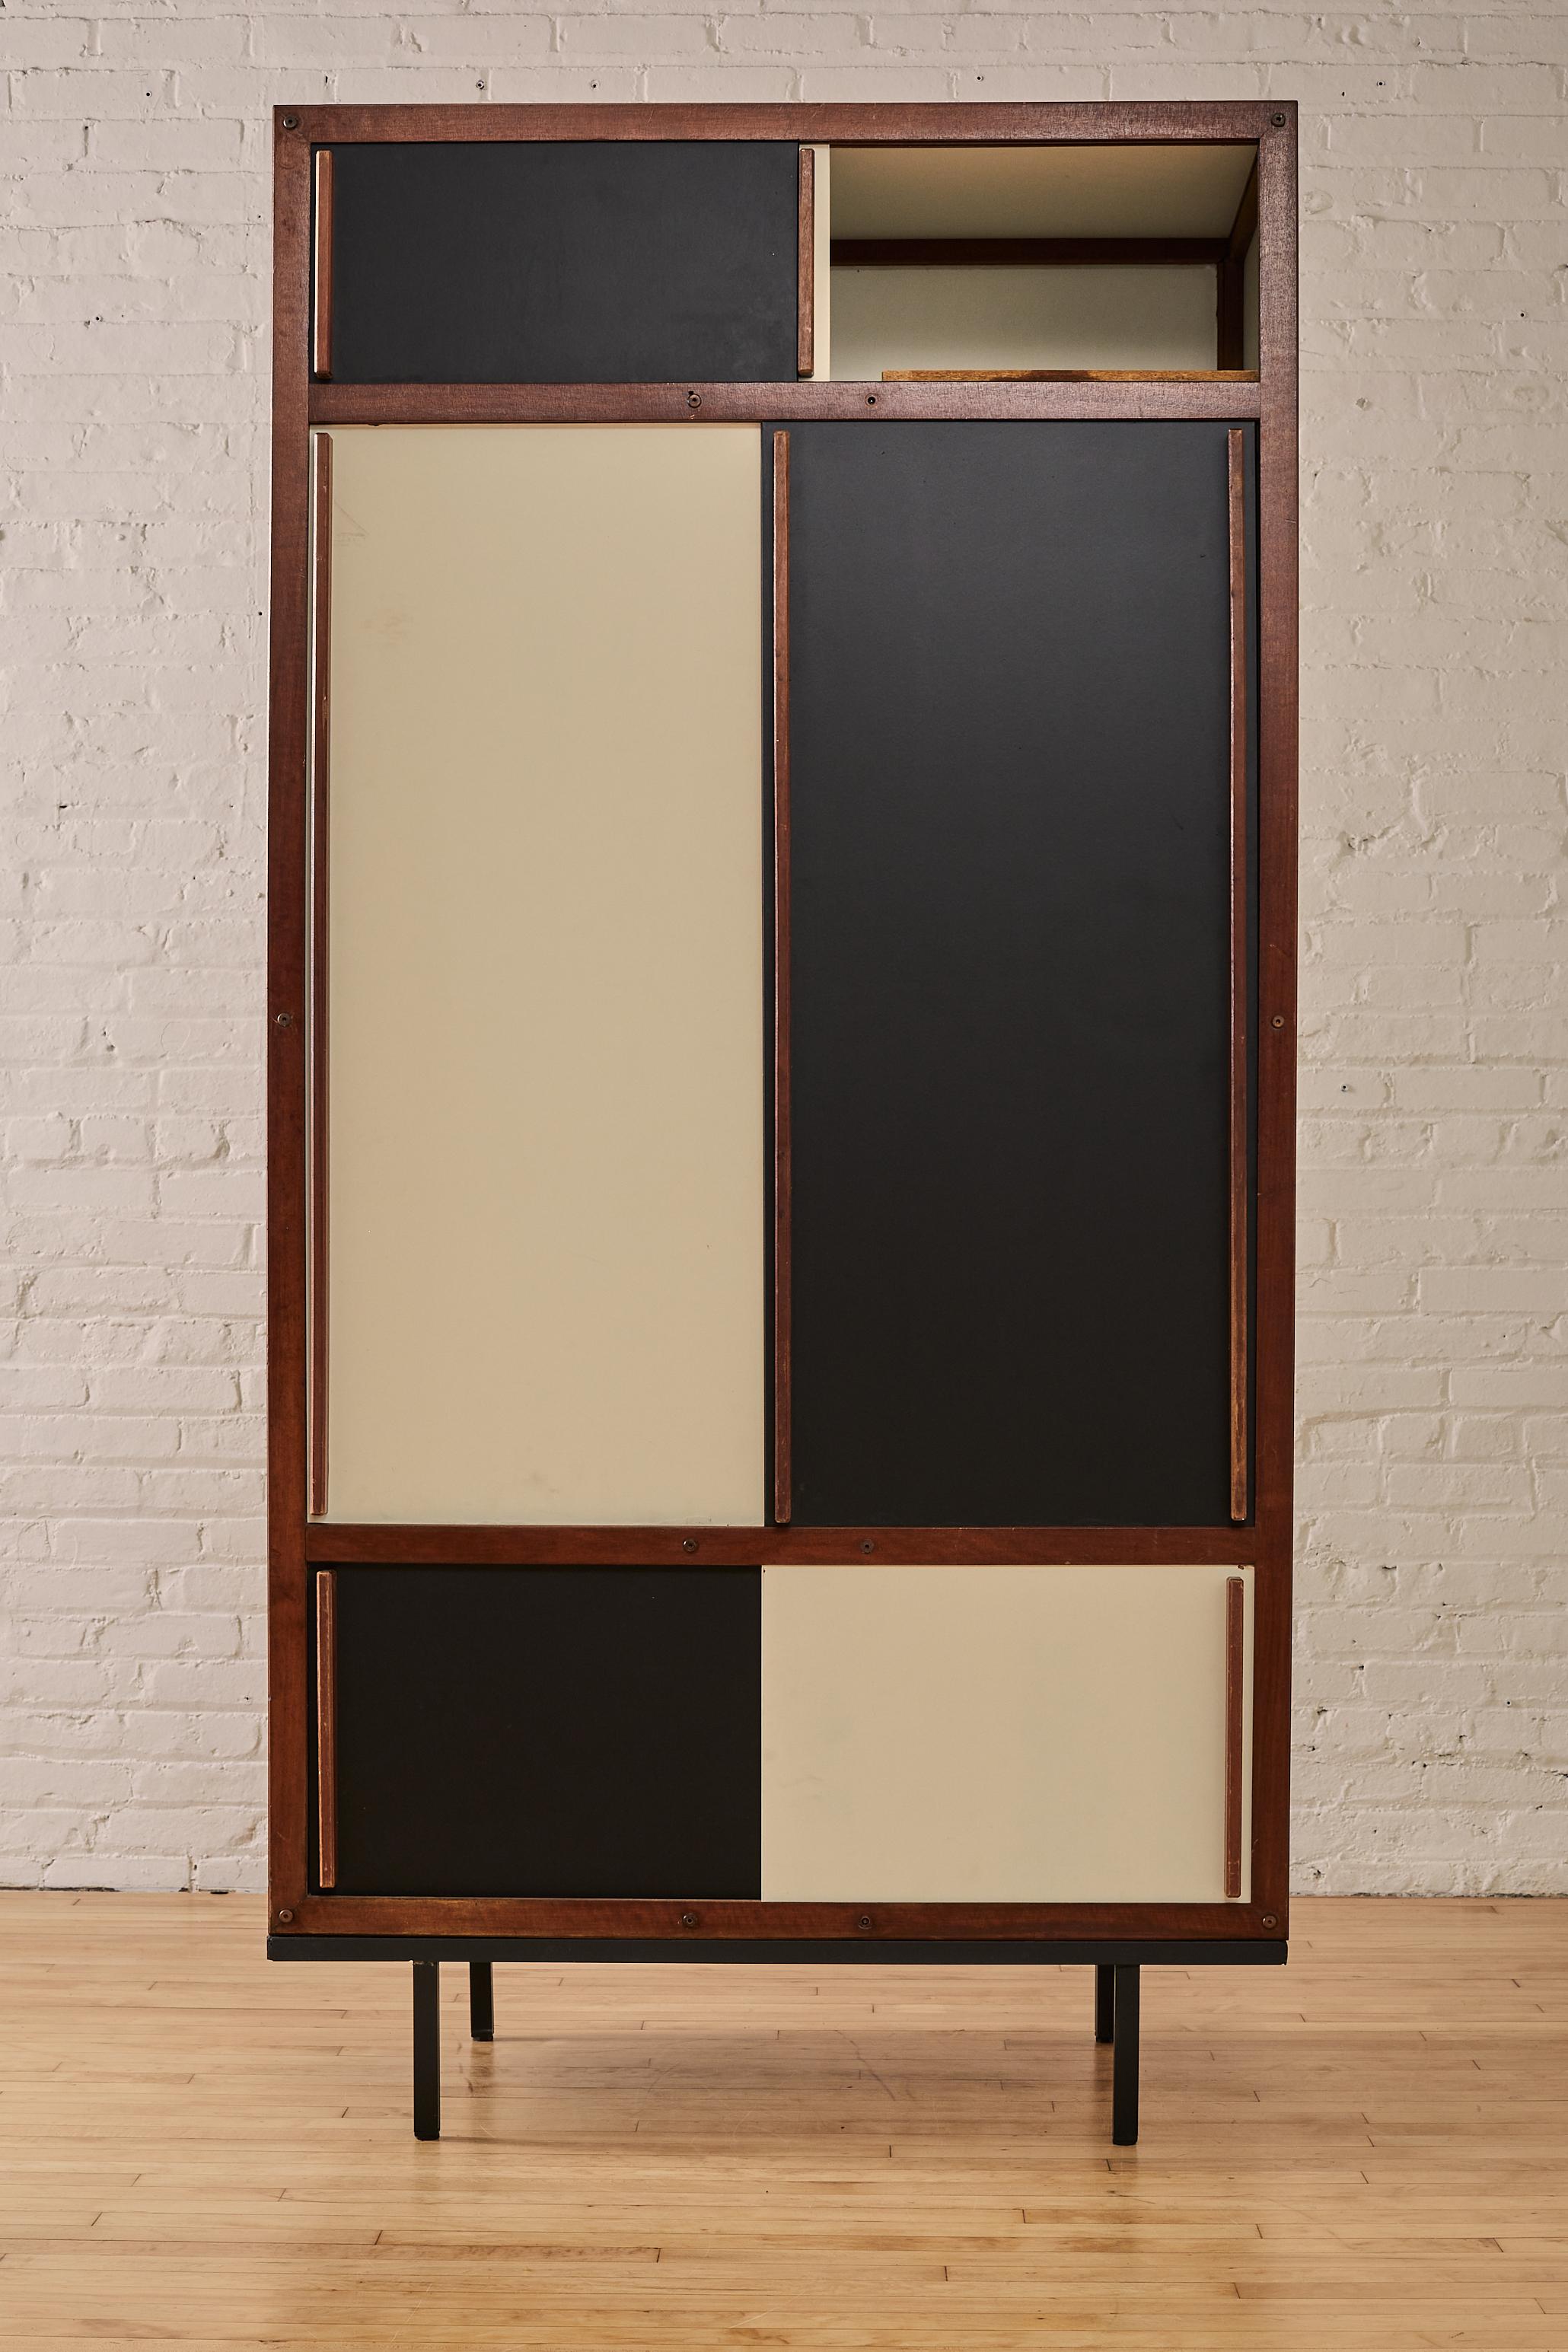 Mid Century Modern Wardrobe by André Sornay adorned with black and white sliding doors. The wardrobe rests atop a sleek black metal base. Inside, the André Sornay is a hanging bar to help arrange your clothing with care, while well-placed shelving